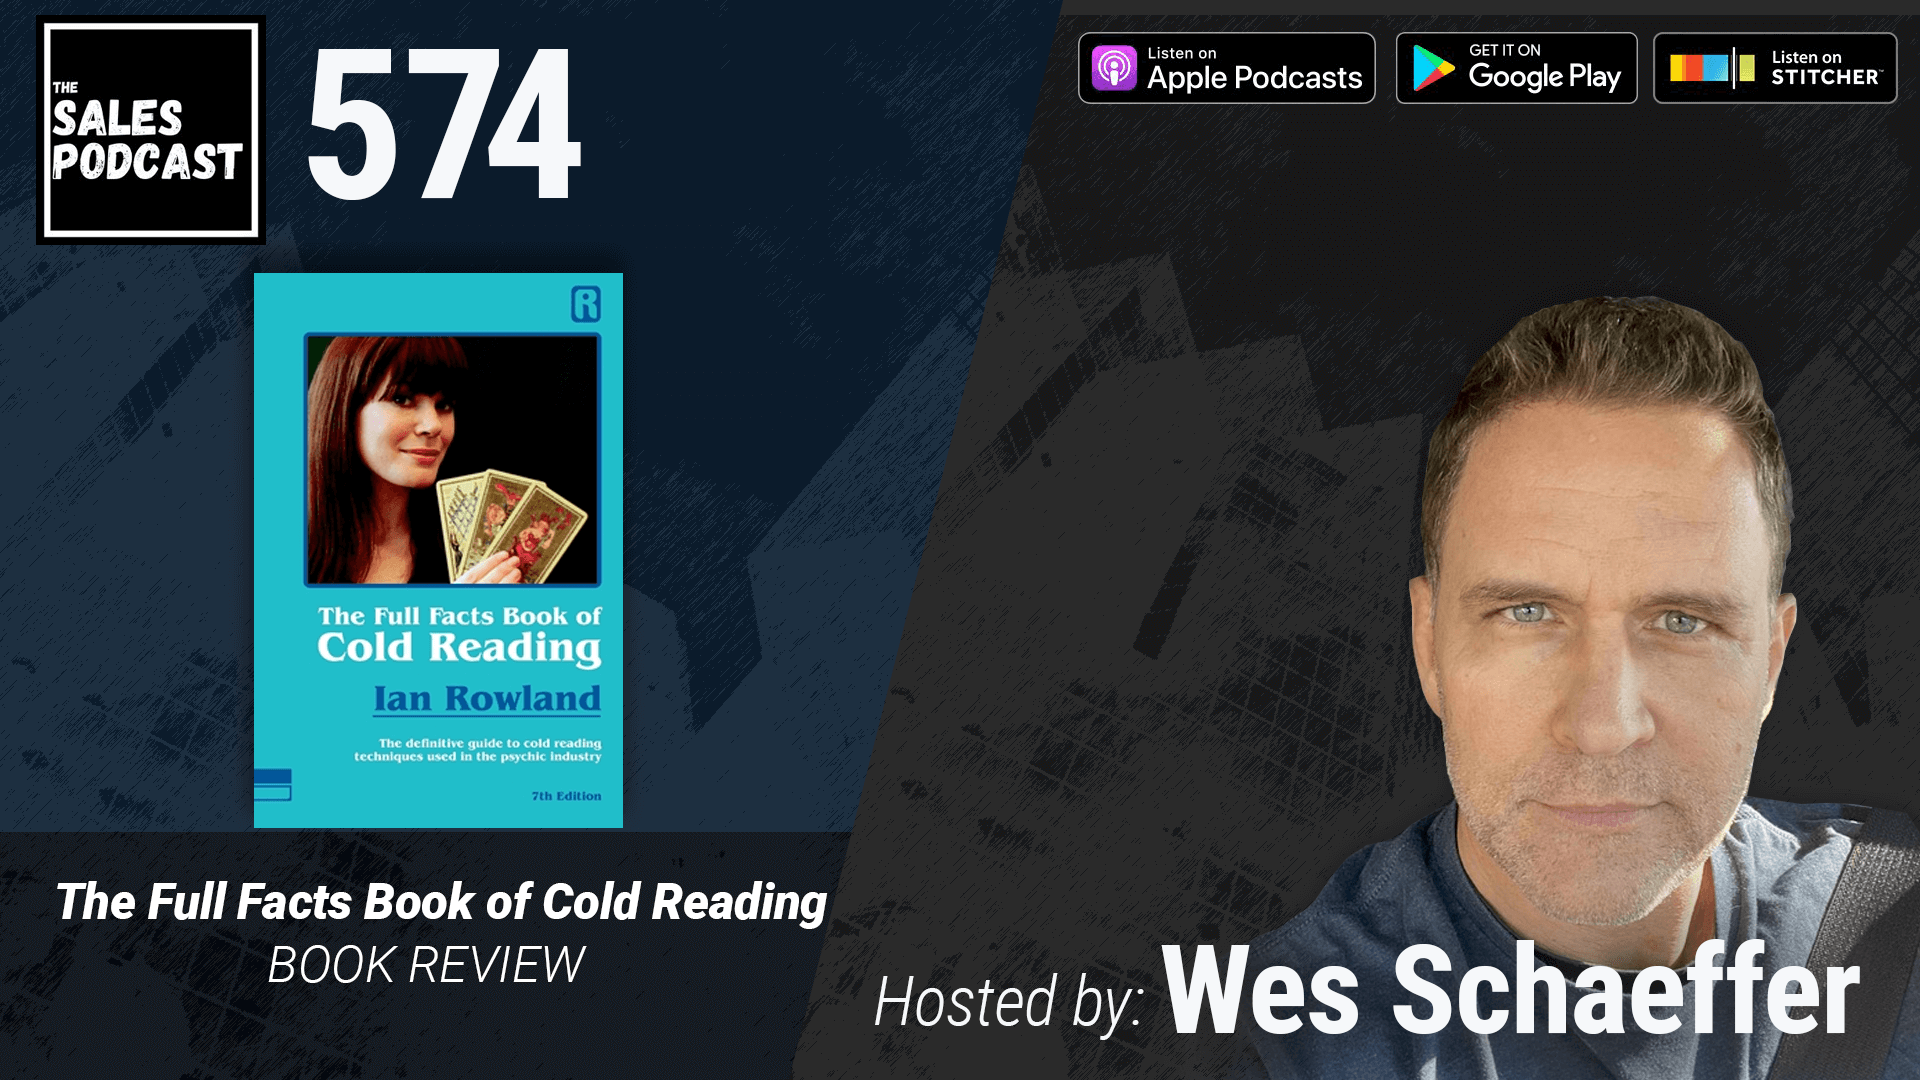 Read minds to make more sales with Ian Rowland's The Full Facts book of Cold Reading on The Sales Podcast.